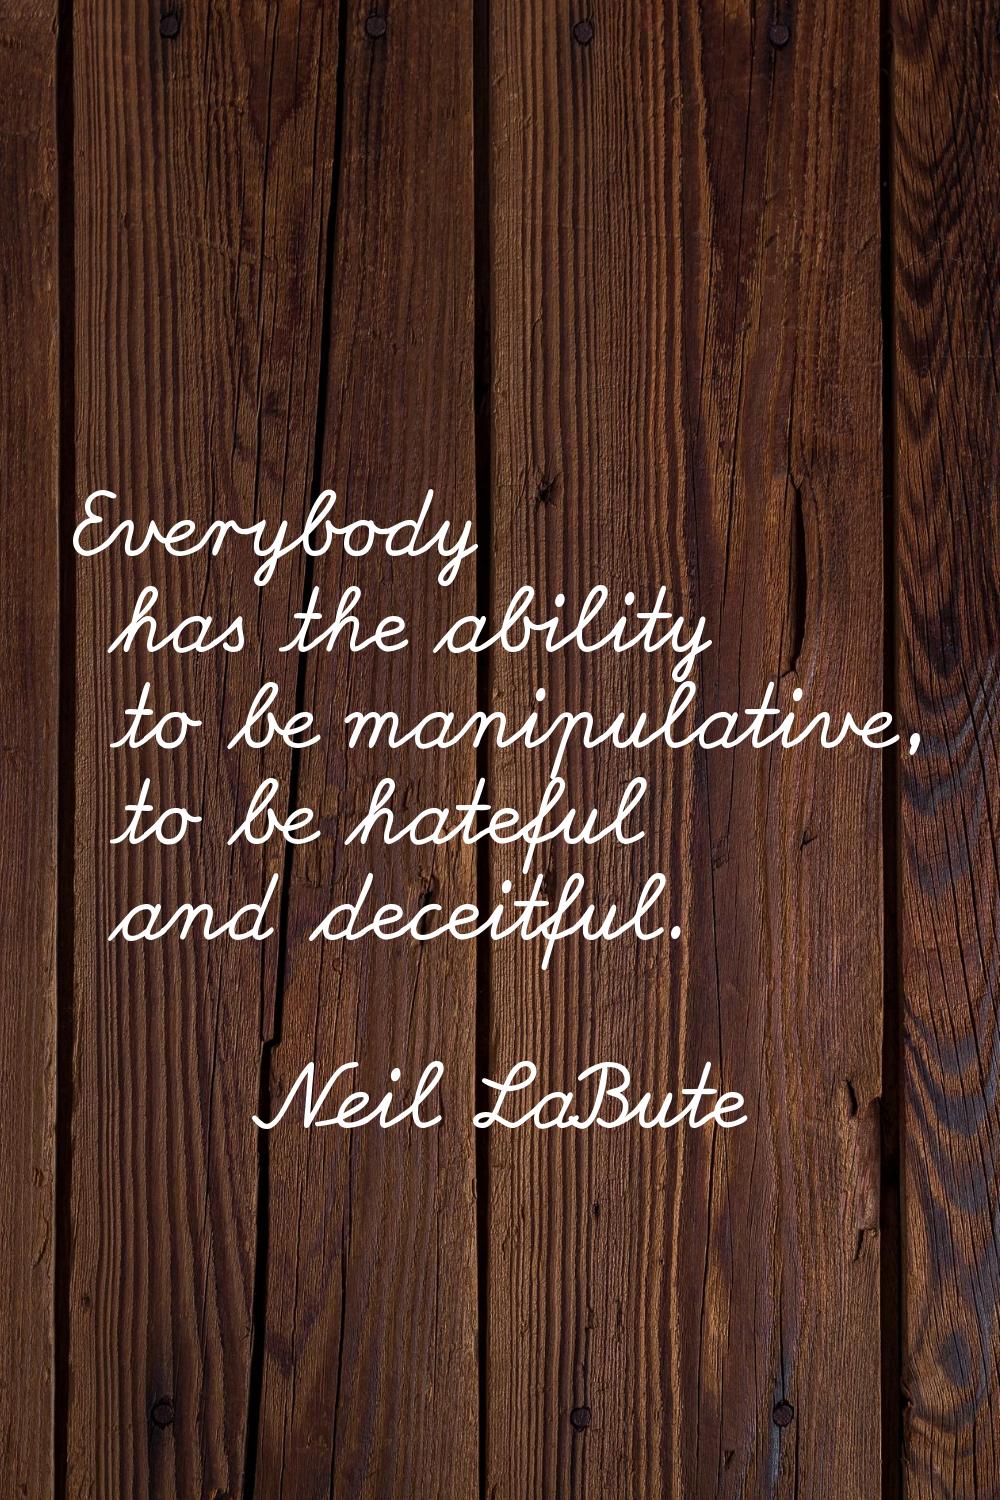 Everybody has the ability to be manipulative, to be hateful and deceitful.